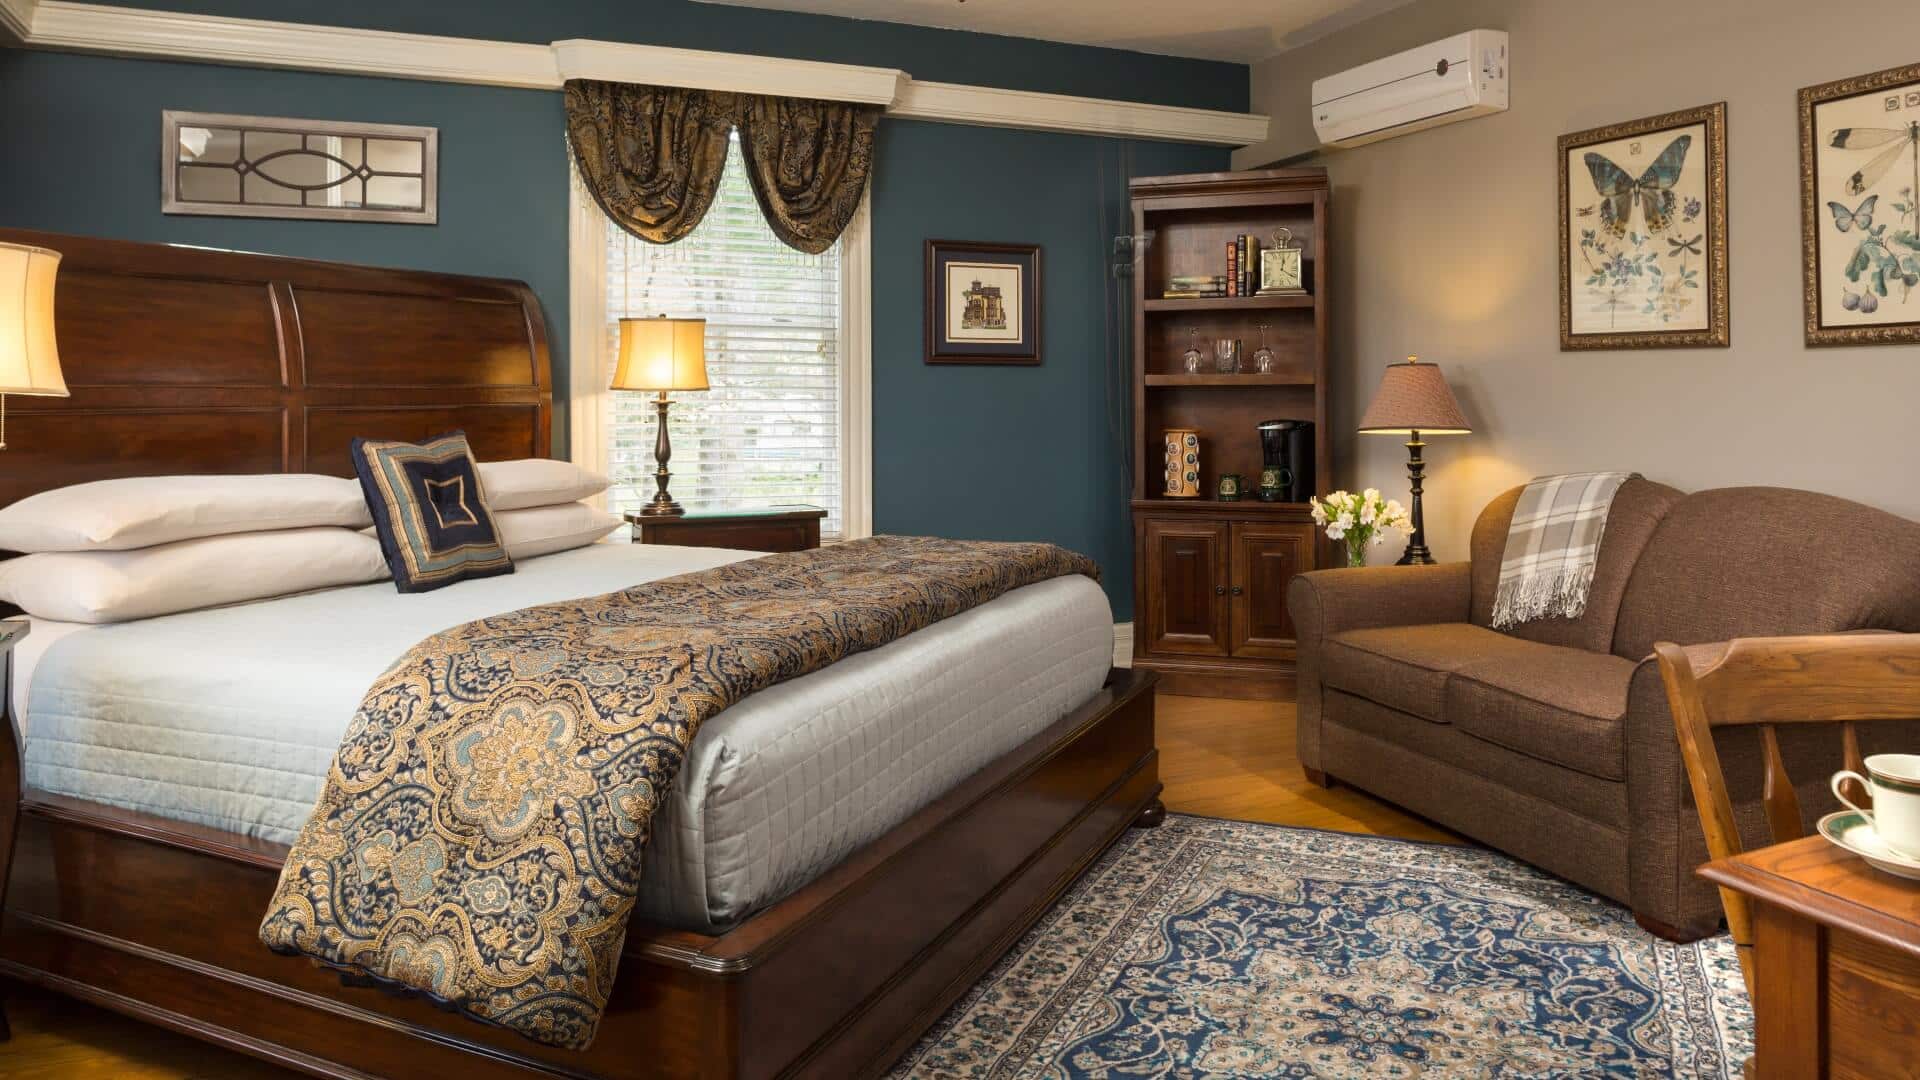 Elegant bedroom in blue and taupe hues with king bed, couch, and large window